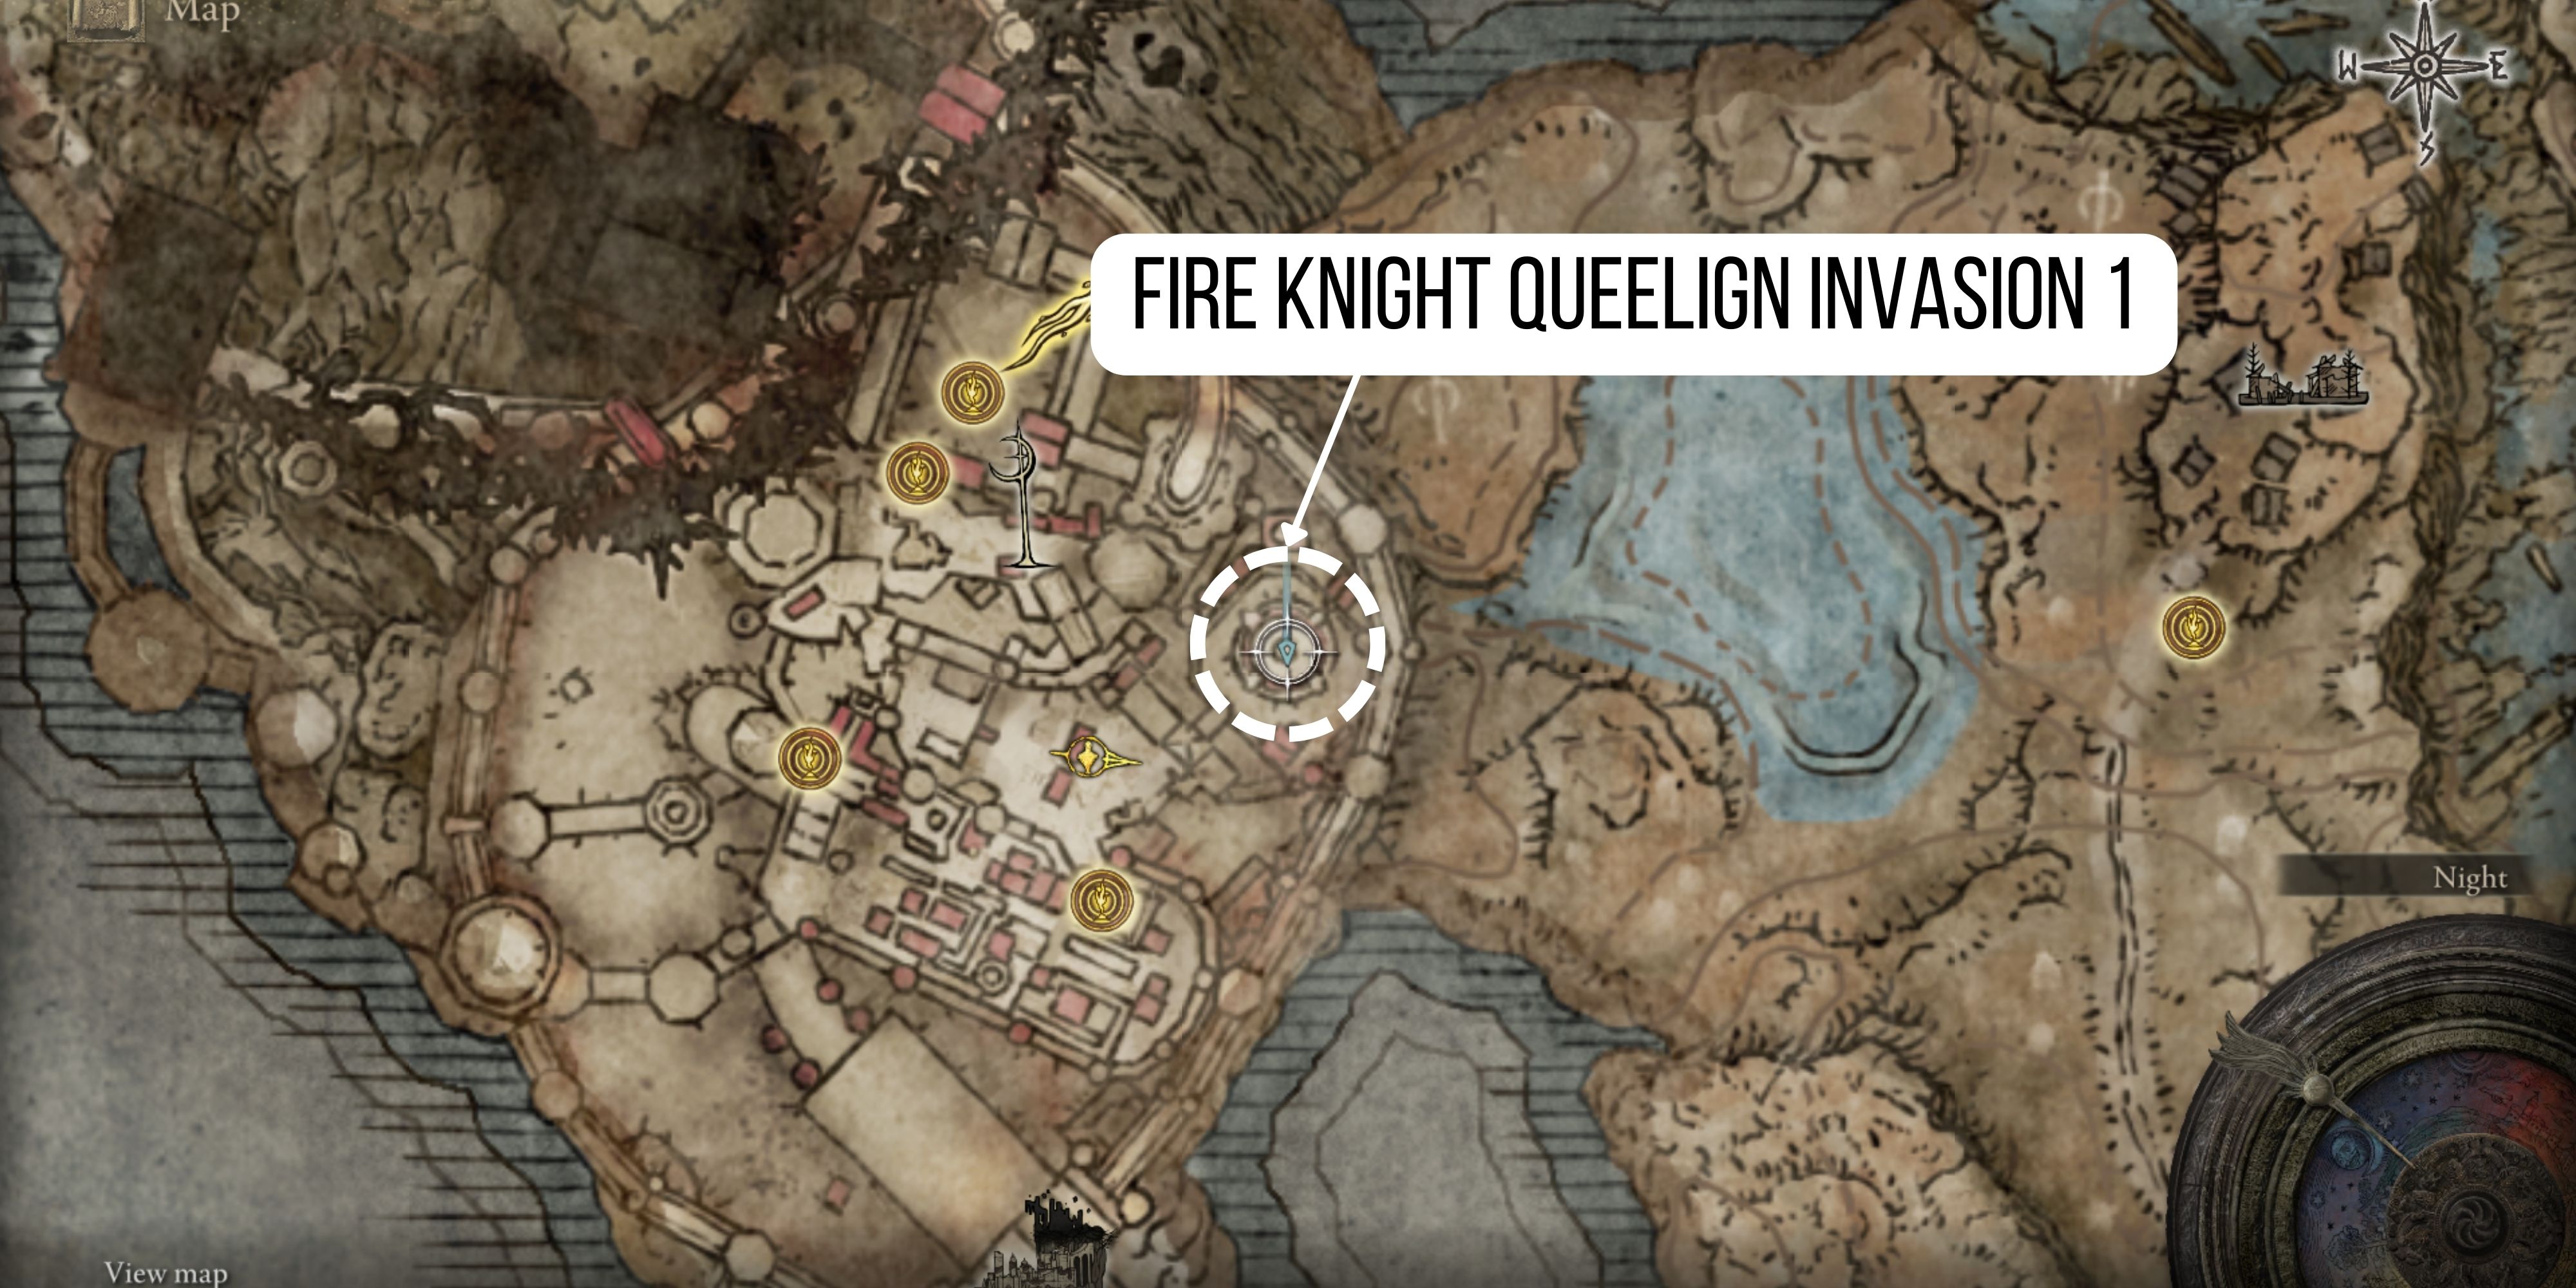 Fire Knight Queelign Invasion 1 location in elden ring shadow of the erdtree